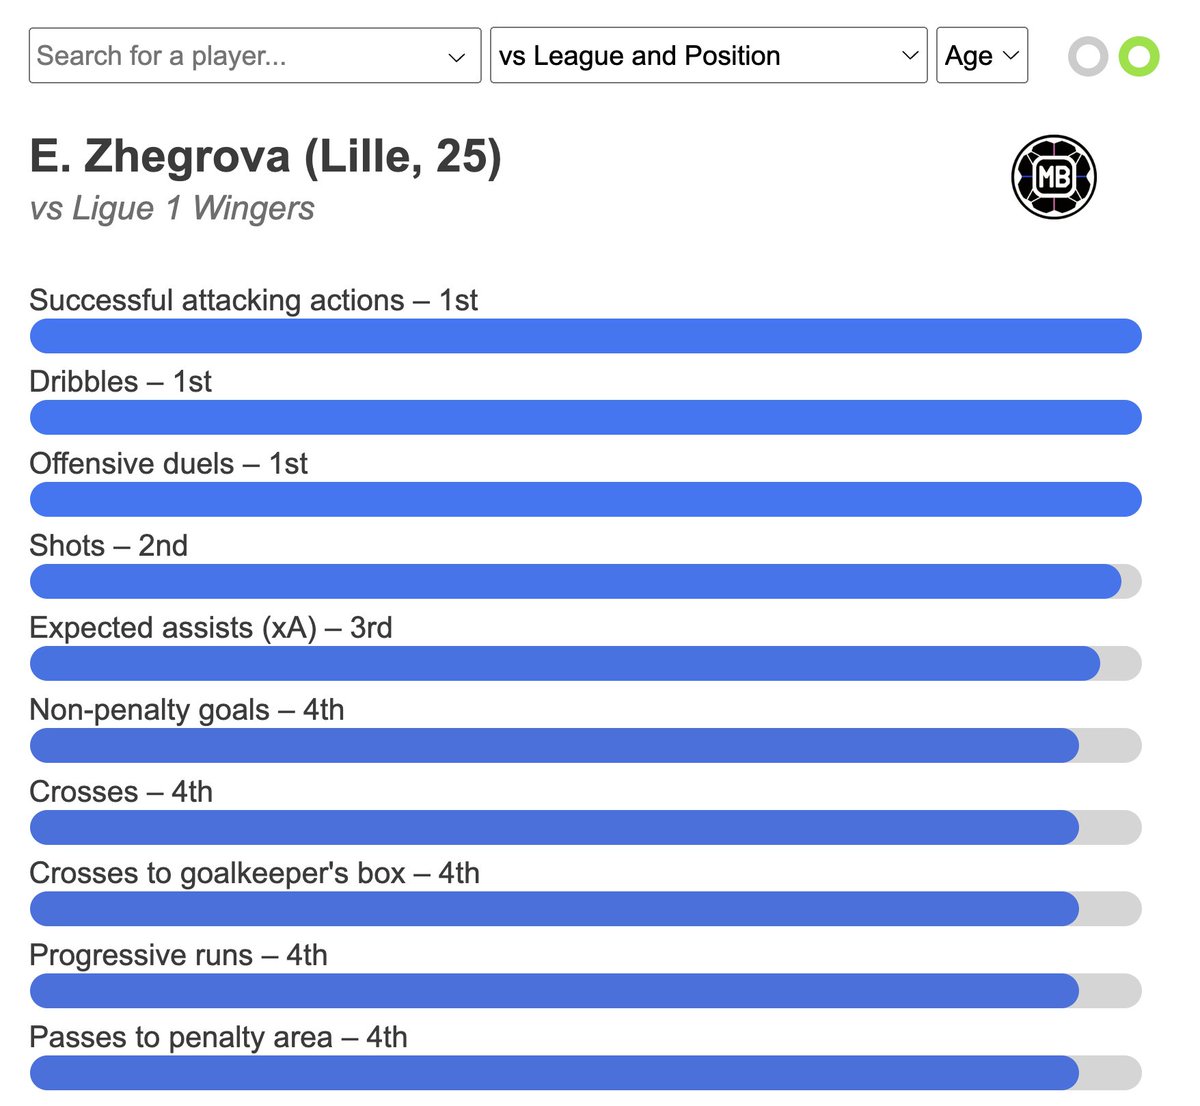 🇽🇰 Edon Zhegrova vs Ligue 1 Wingers, 23/24 🥇 Dribbles – 1st 🥇 Offensive duels – 1st 🥇 Attacking actions – 1st 🥈 Shots – 2nd 🥉 Expected assists – 3rd 🏅 Non-penalty goals – 4th 🏅 Crosses – 4th 🏅 Progressive runs – 4th 🏅 Passes to penalty area – 4th Confirmation season